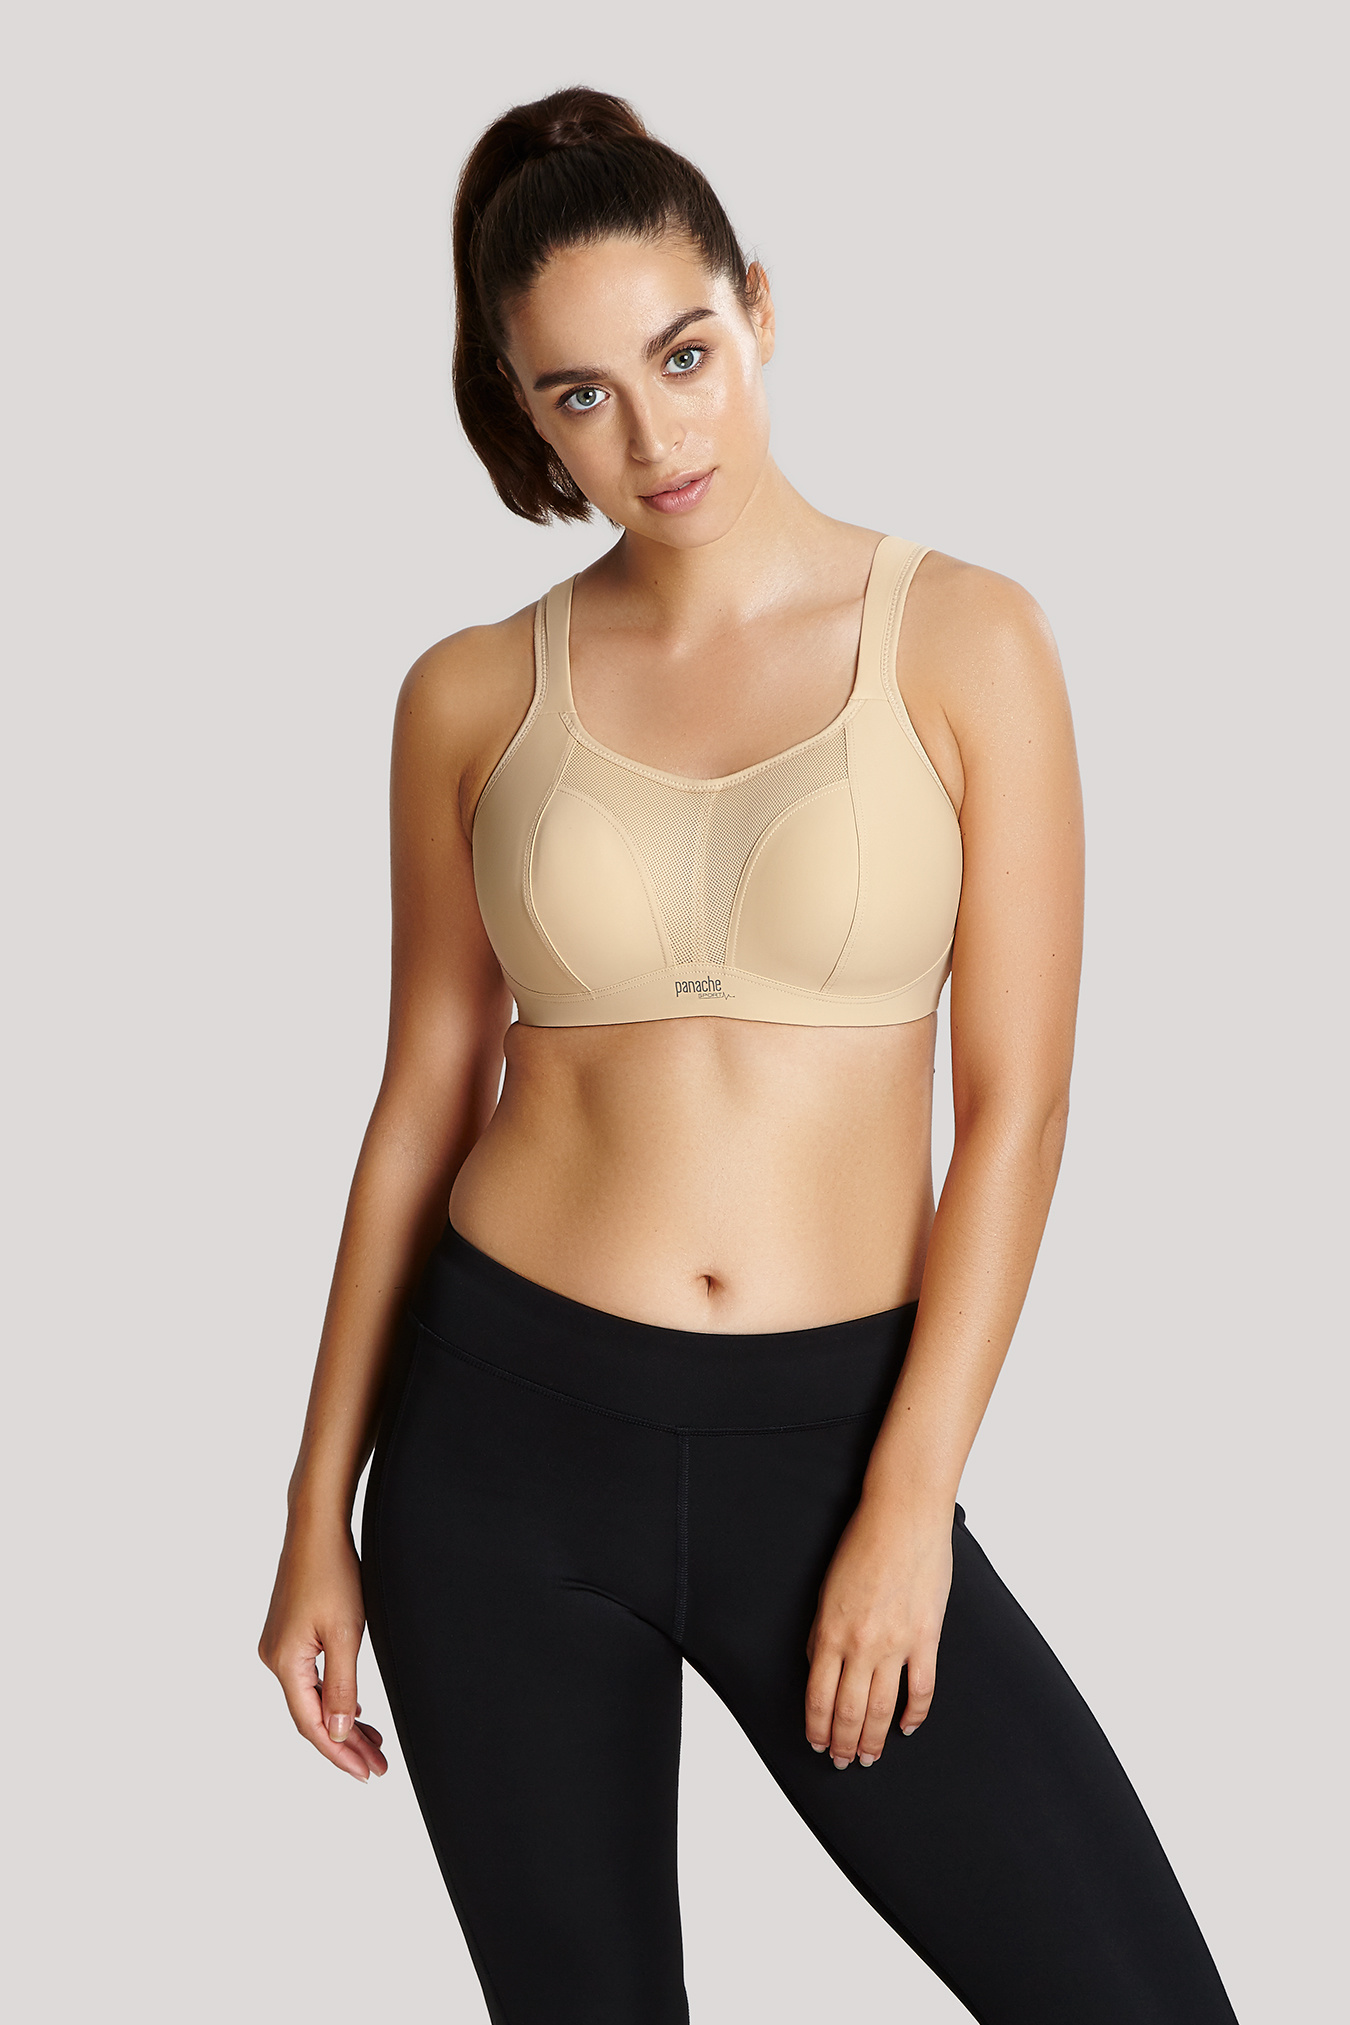 Panache Sports Bra Non Wired Moulded Full Cup J-Hook Supportive Sportswear  7341B